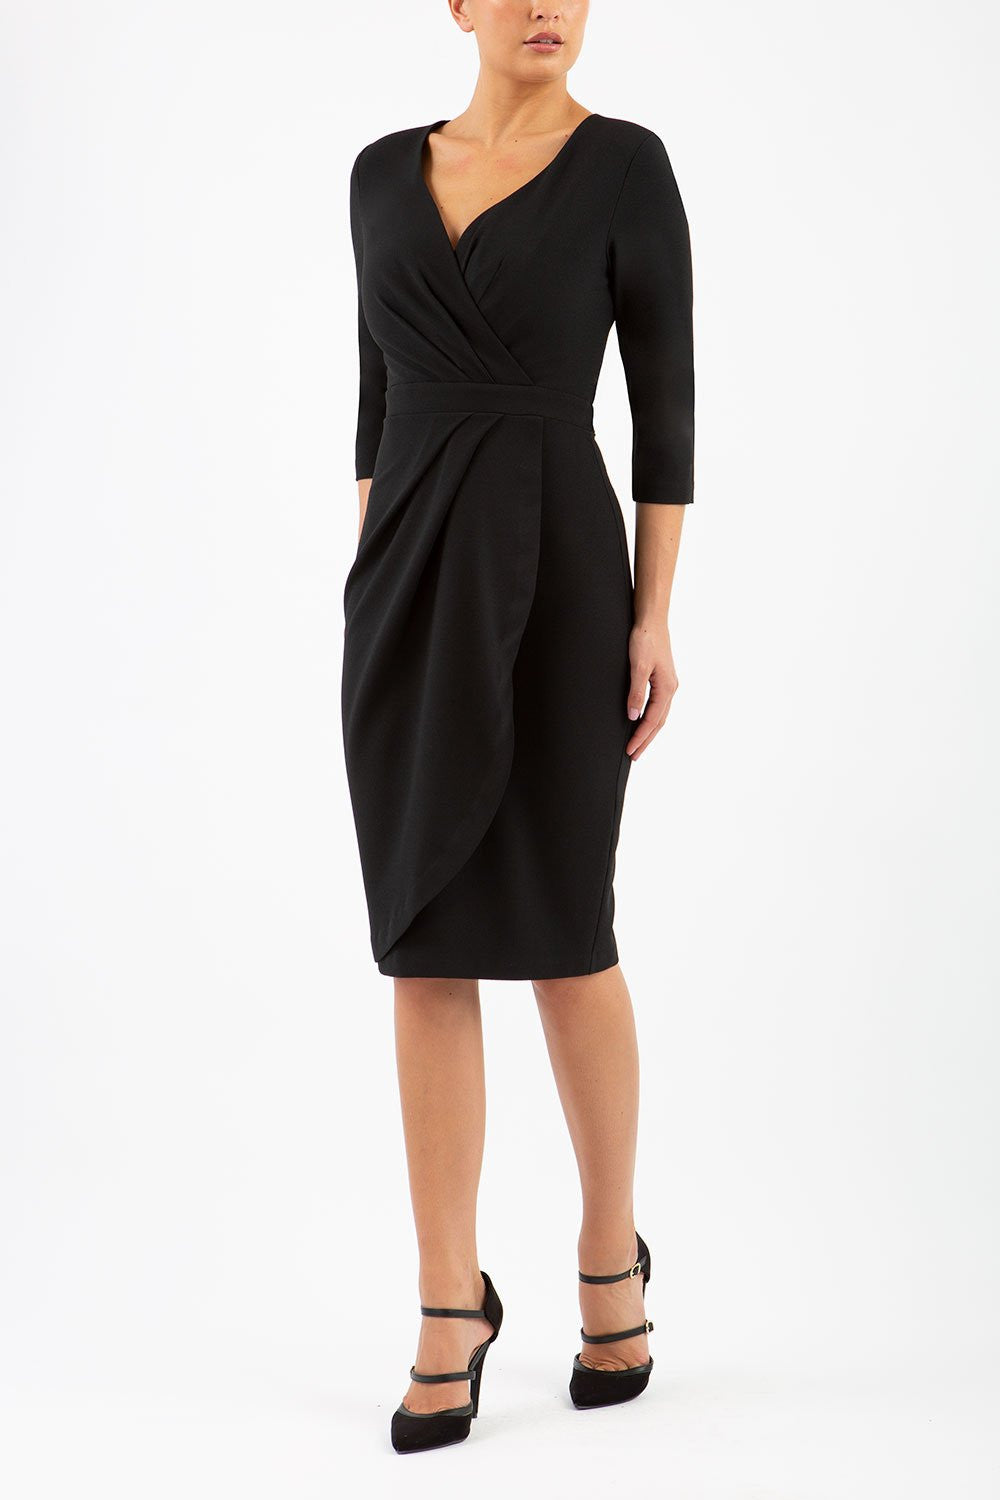 model wearing diva pencil dress tulip design with overlapping pencil skirt with 3 4 sleeves in colour black front 